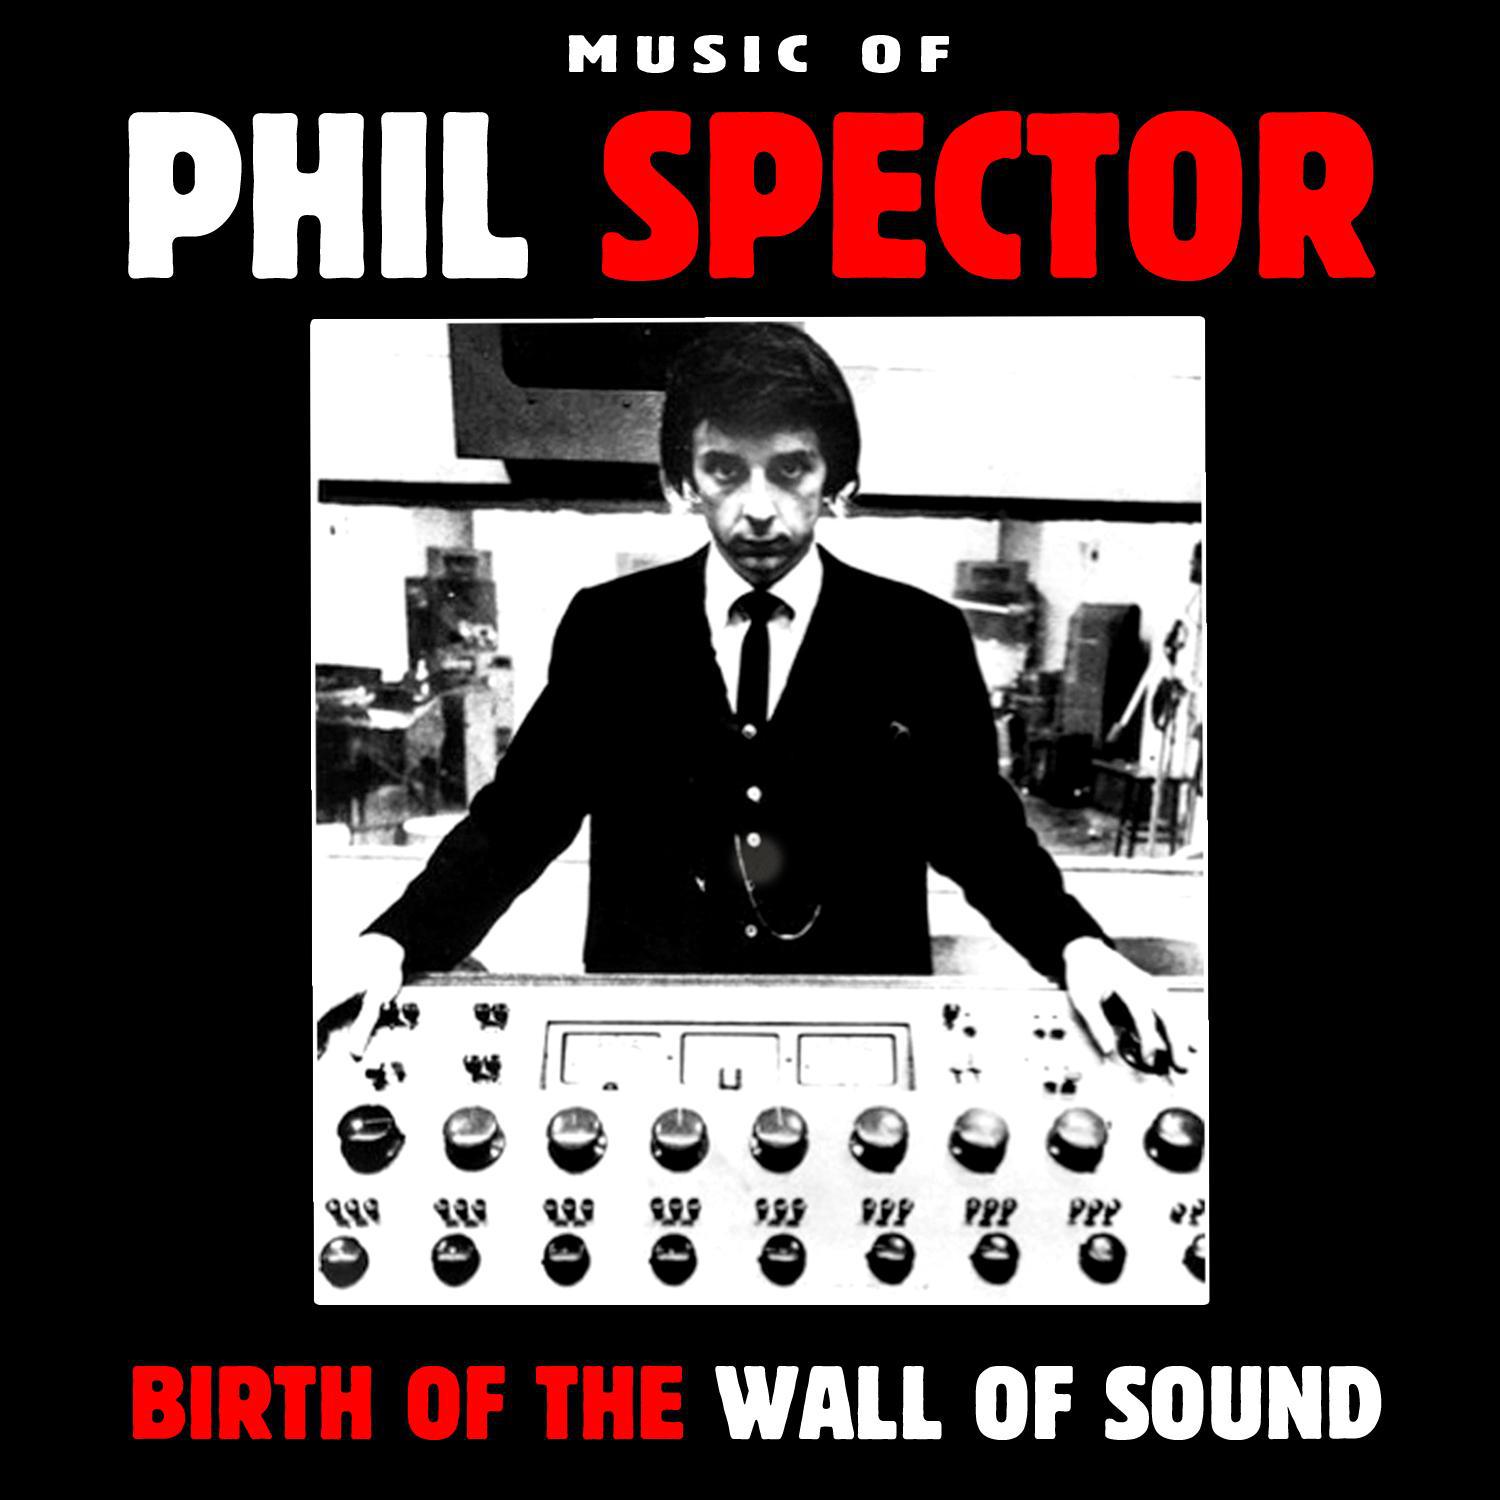 Music of Phil Spector - Birth of the Wall of Sound